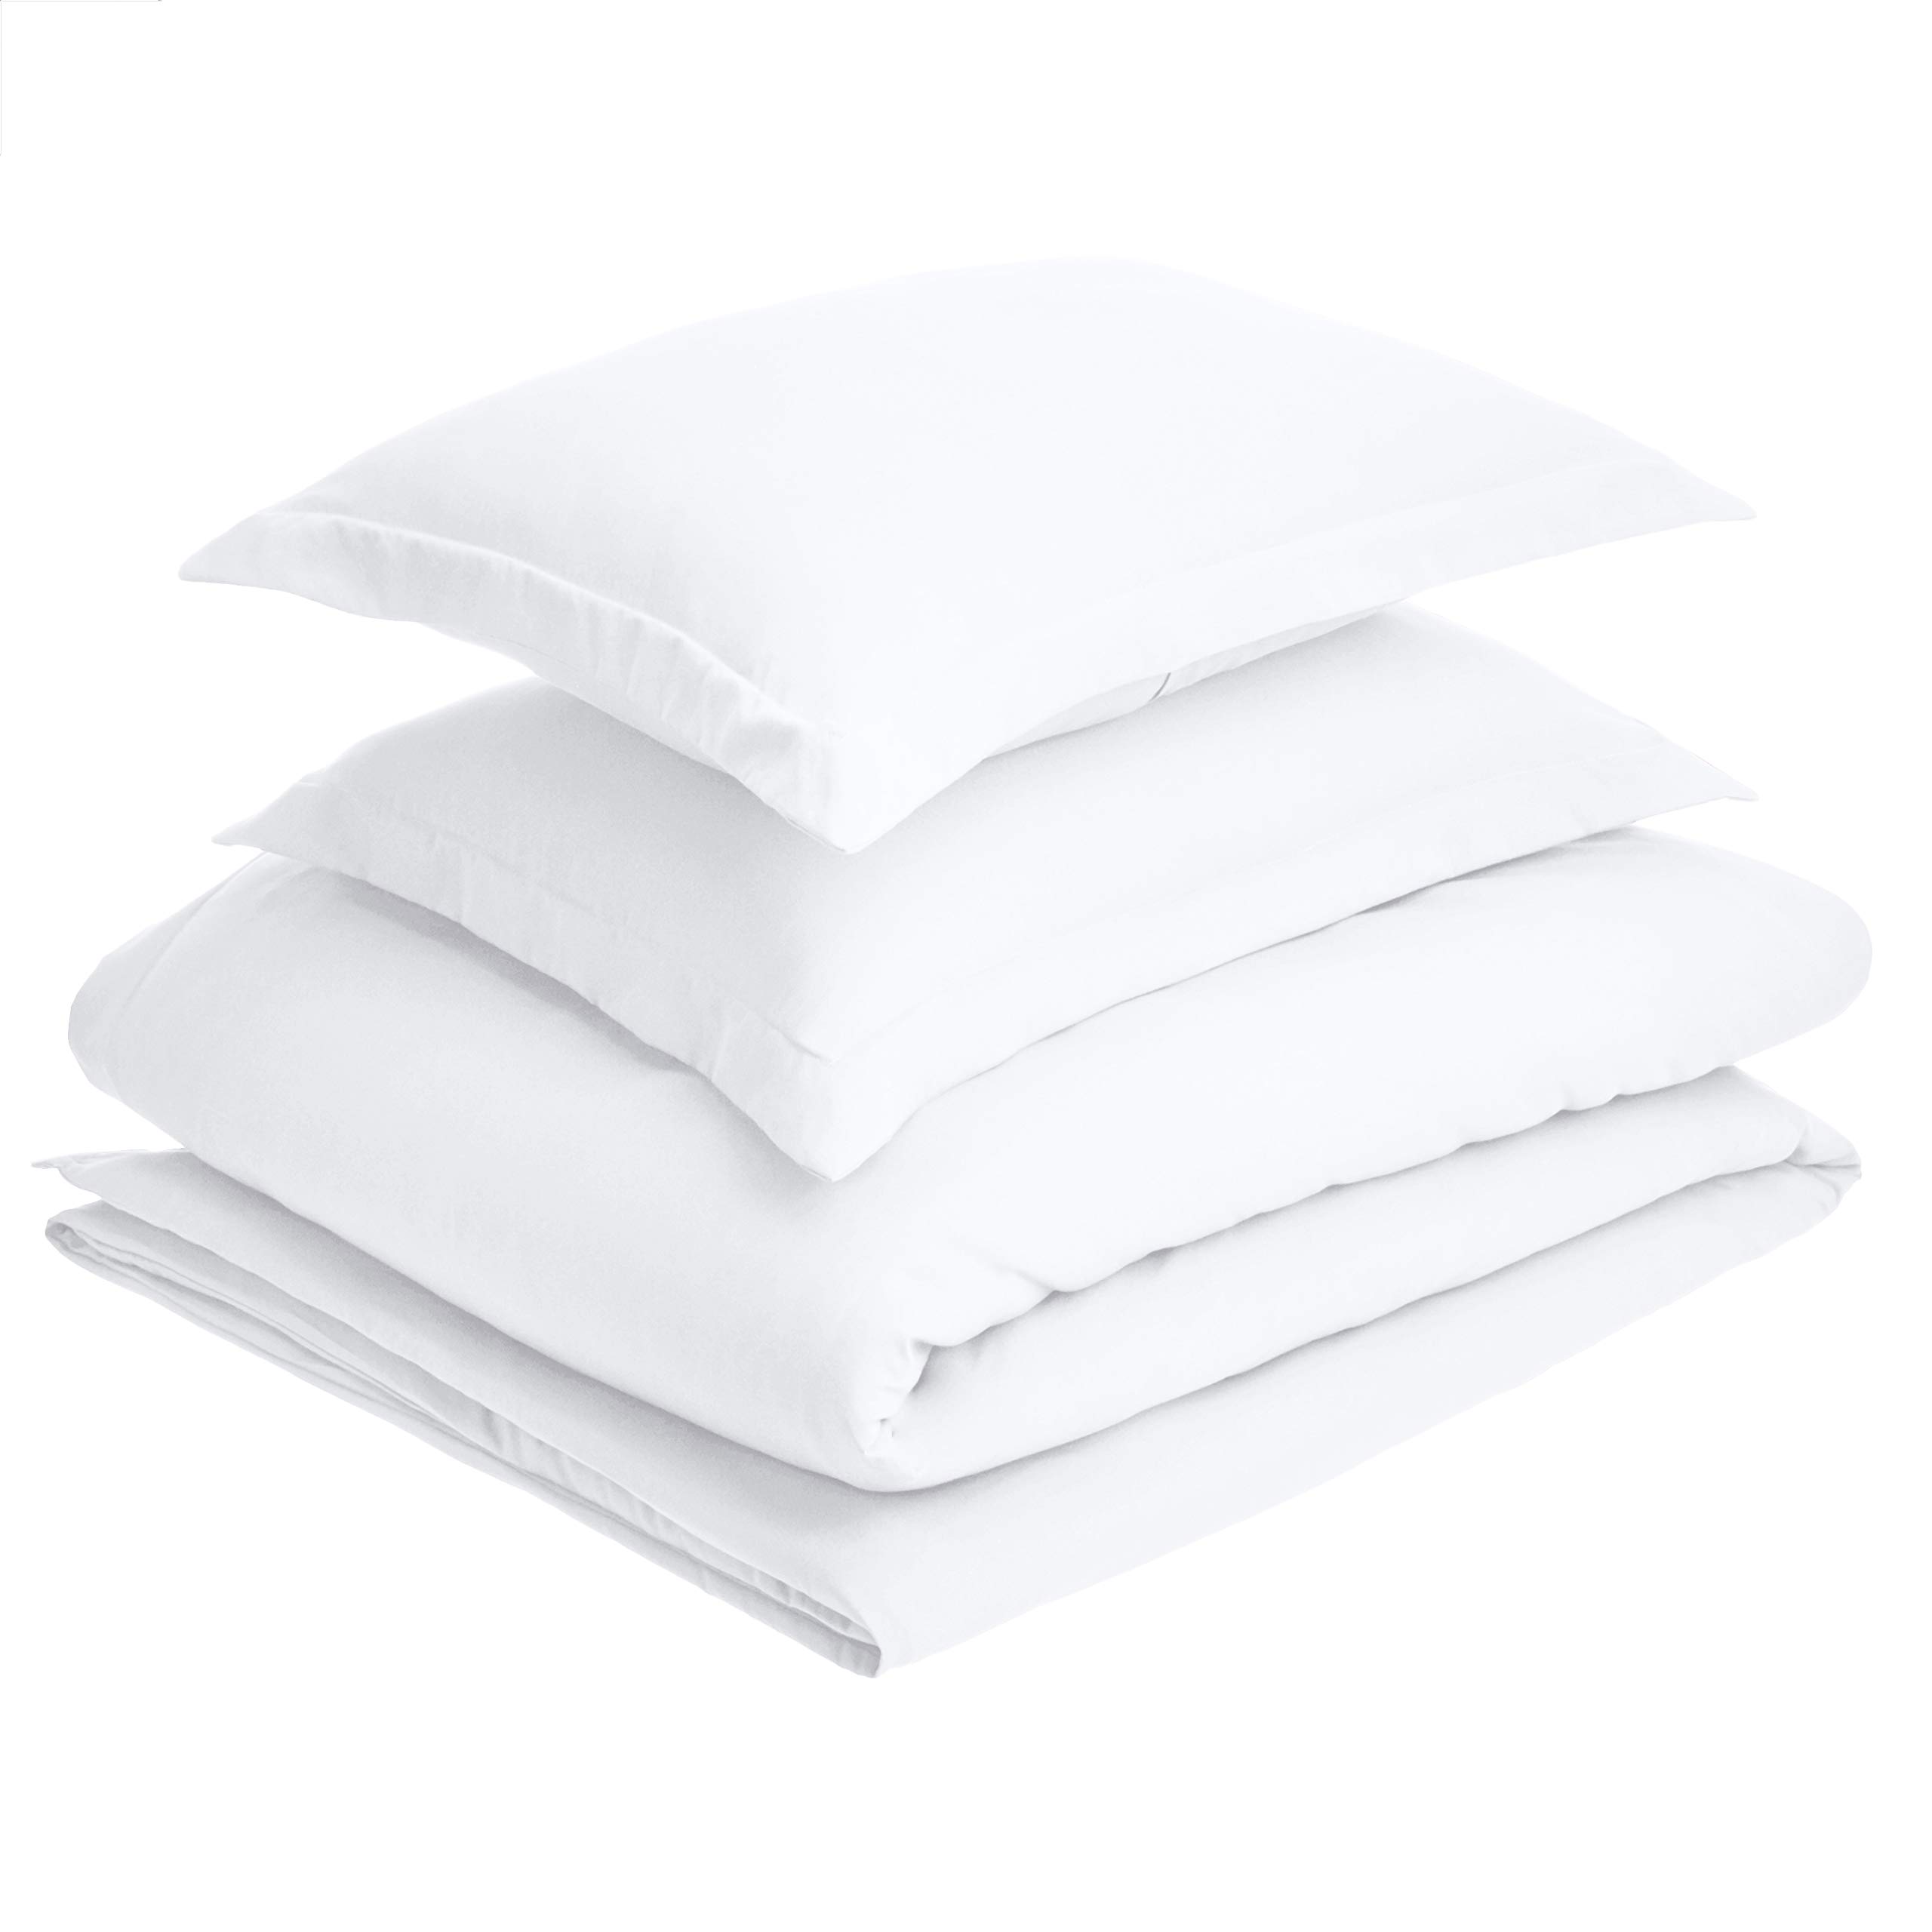 Amazon Basics Lightweight Microfiber 3 Piece Duvet Cover Set with Zipper Closure, King, Bright White, Solid